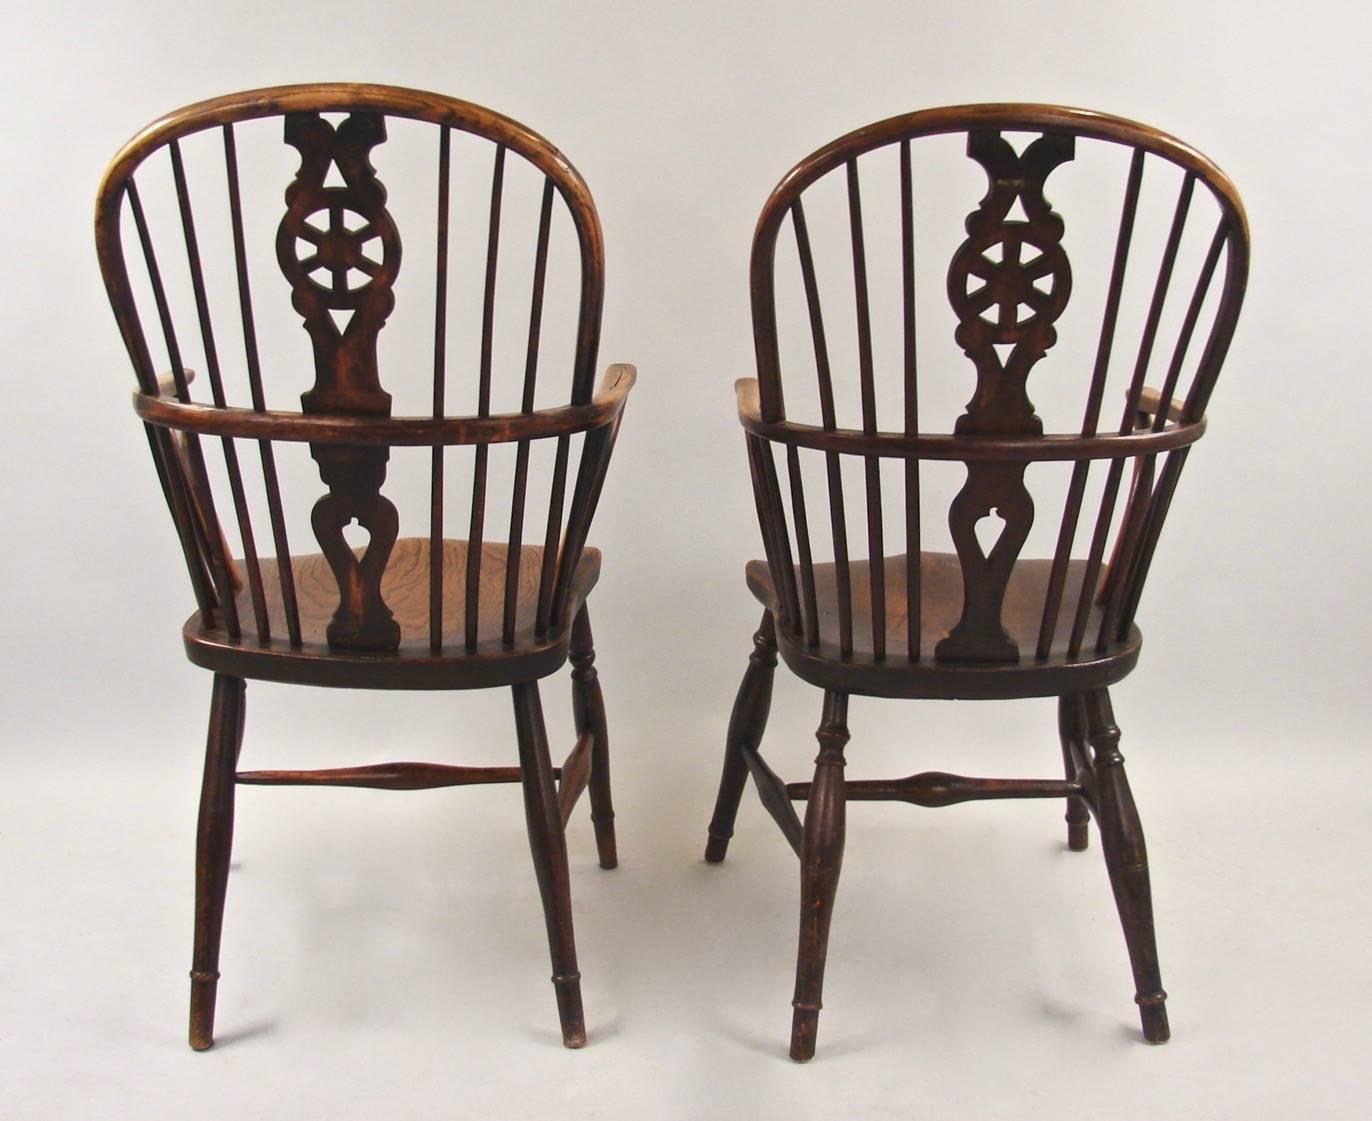 Mid-19th Century Matched Pair of English Wheelback Windsor Armchairs